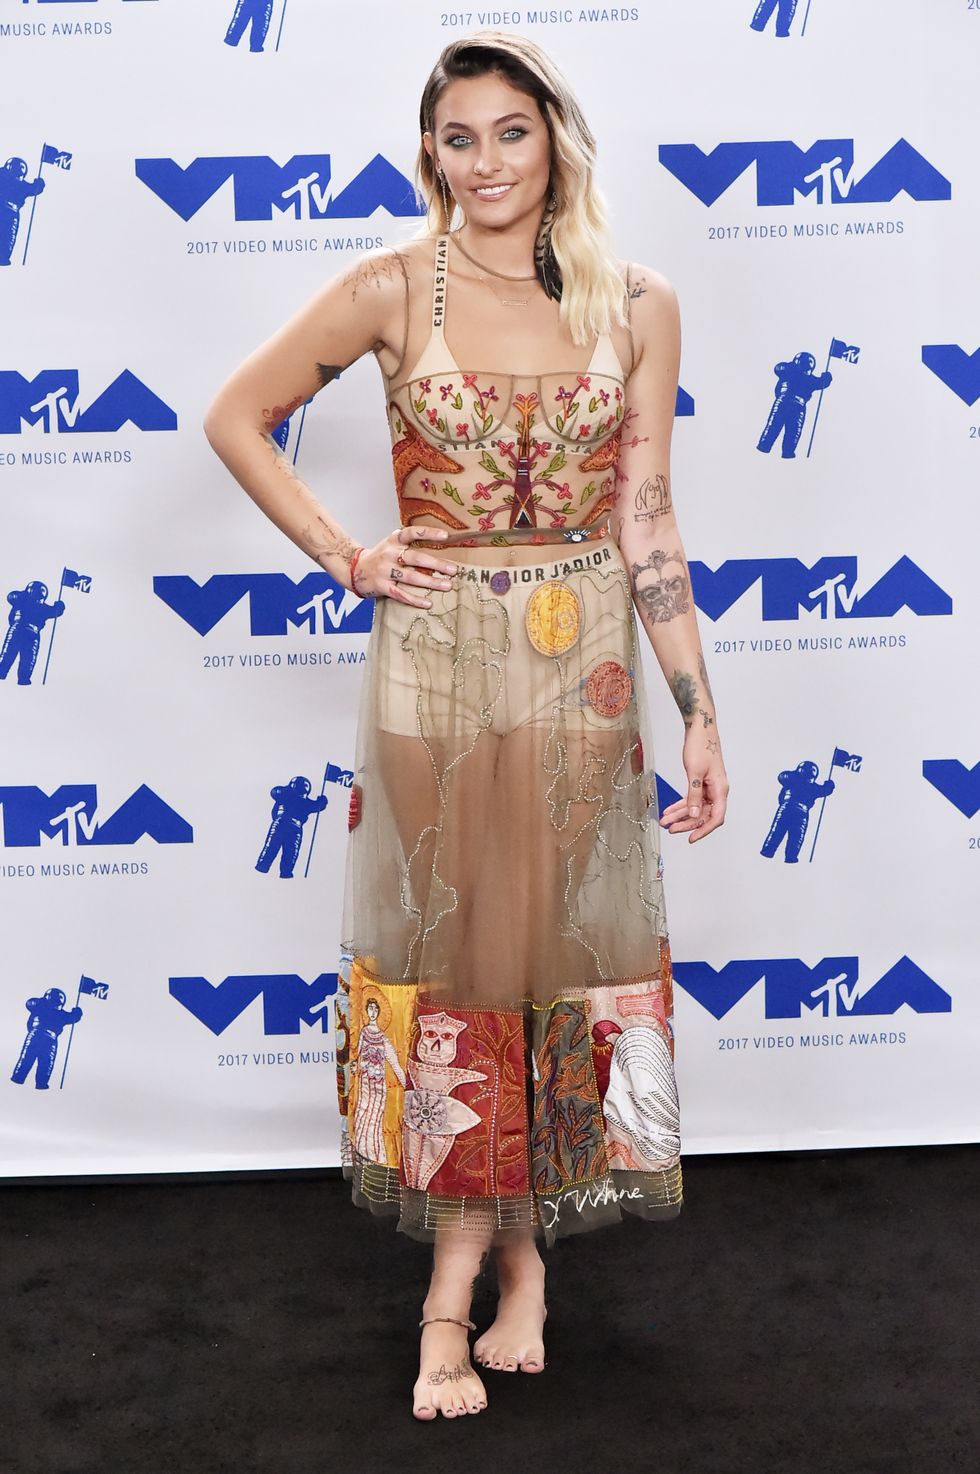 INGLEWOOD, CA - AUGUST 27:  Paris Jackson poses in the press room during the 2017 MTV Video Music Awards at The Forum on August 27, 2017 in Inglewood, California.  (Photo by David Crotty/Patrick McMullan via Getty Images)